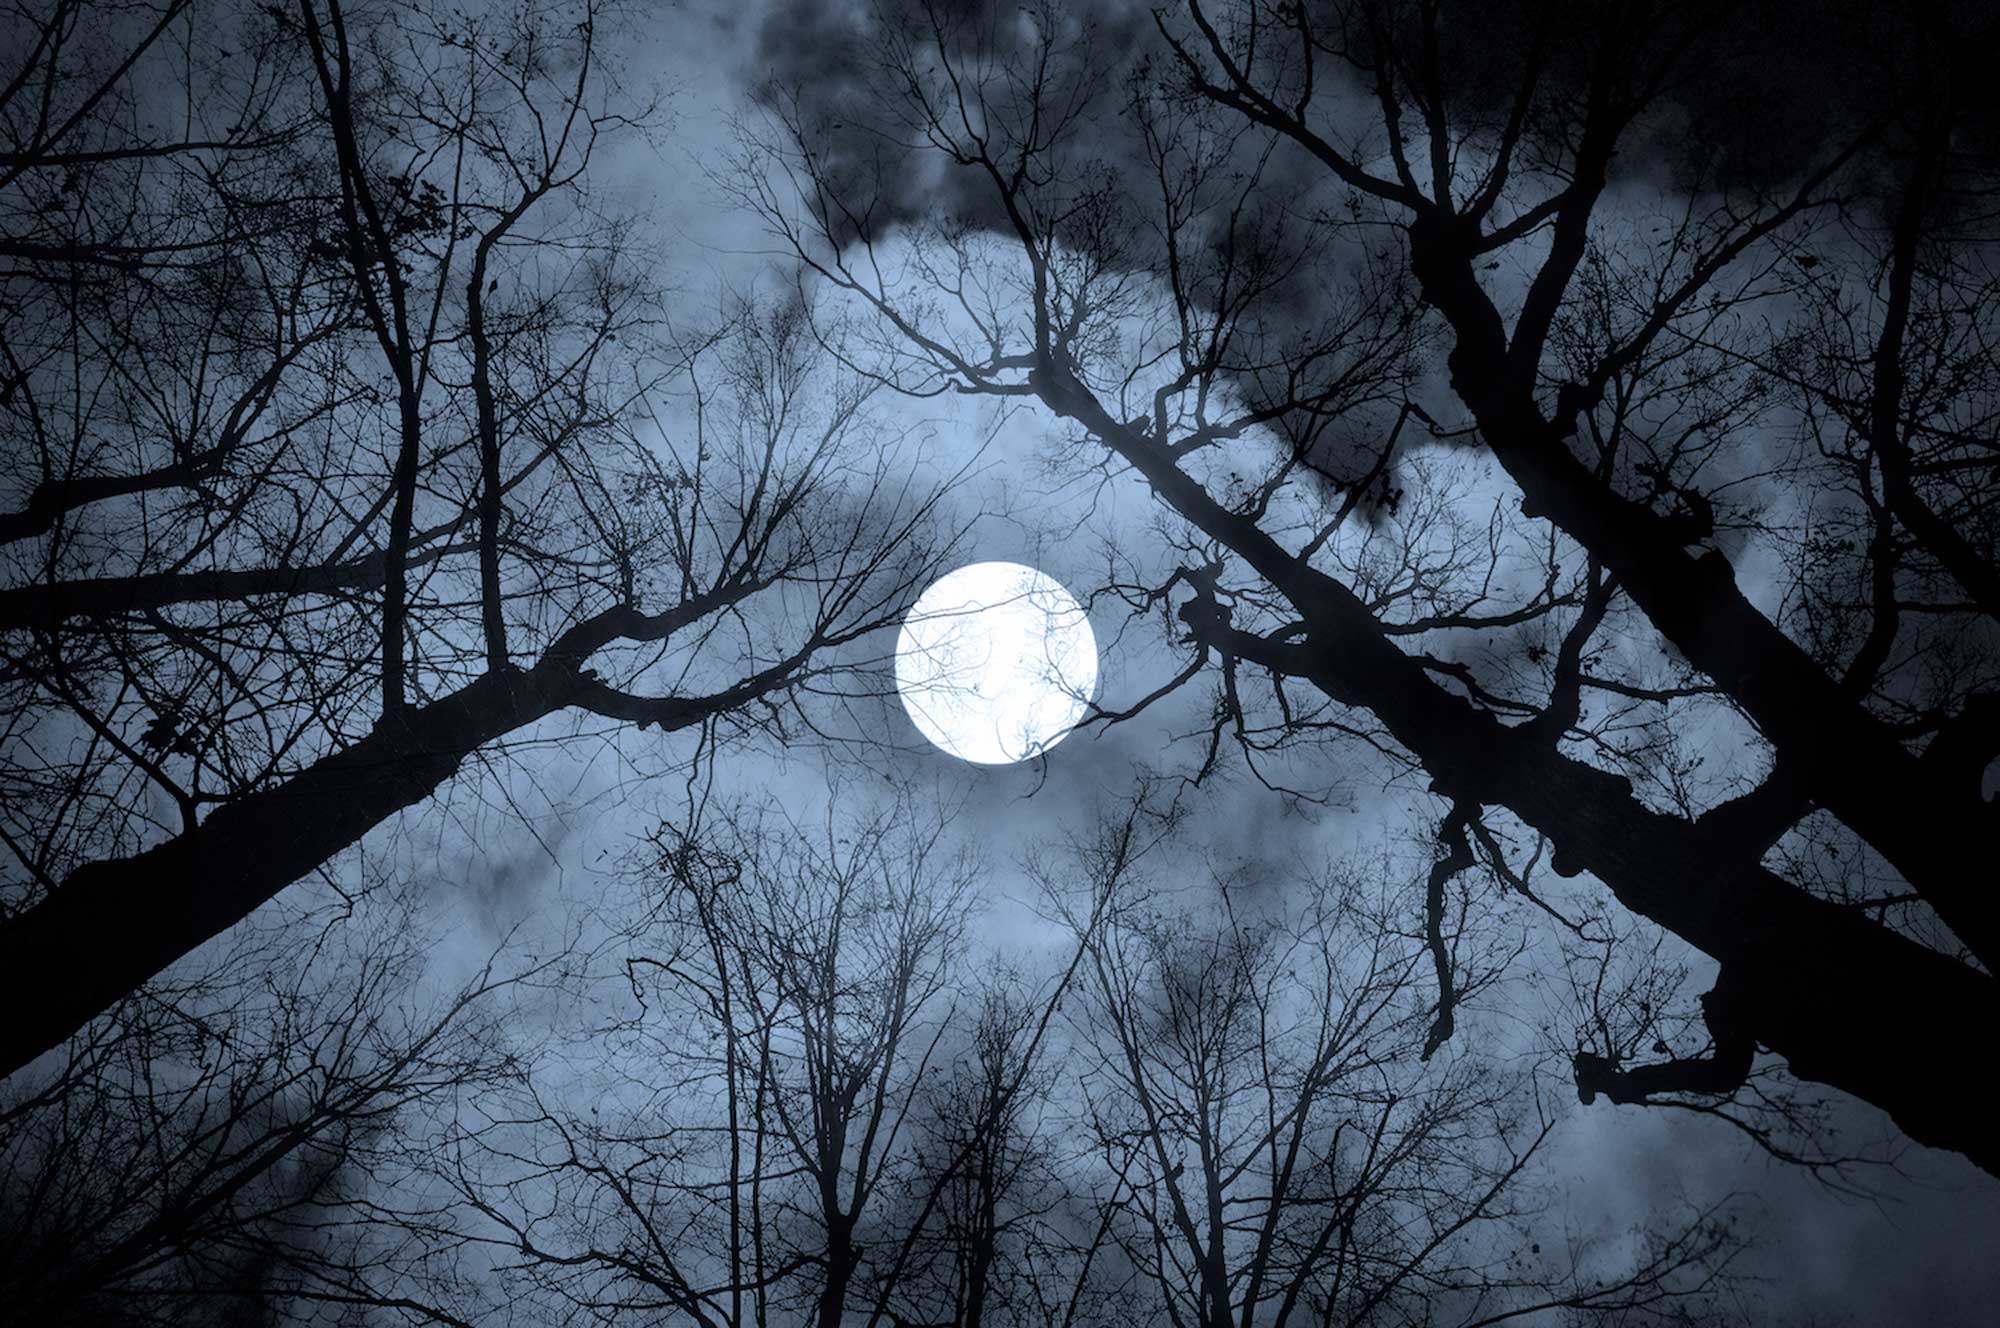 A full moon is seen through a bare tree canopy.